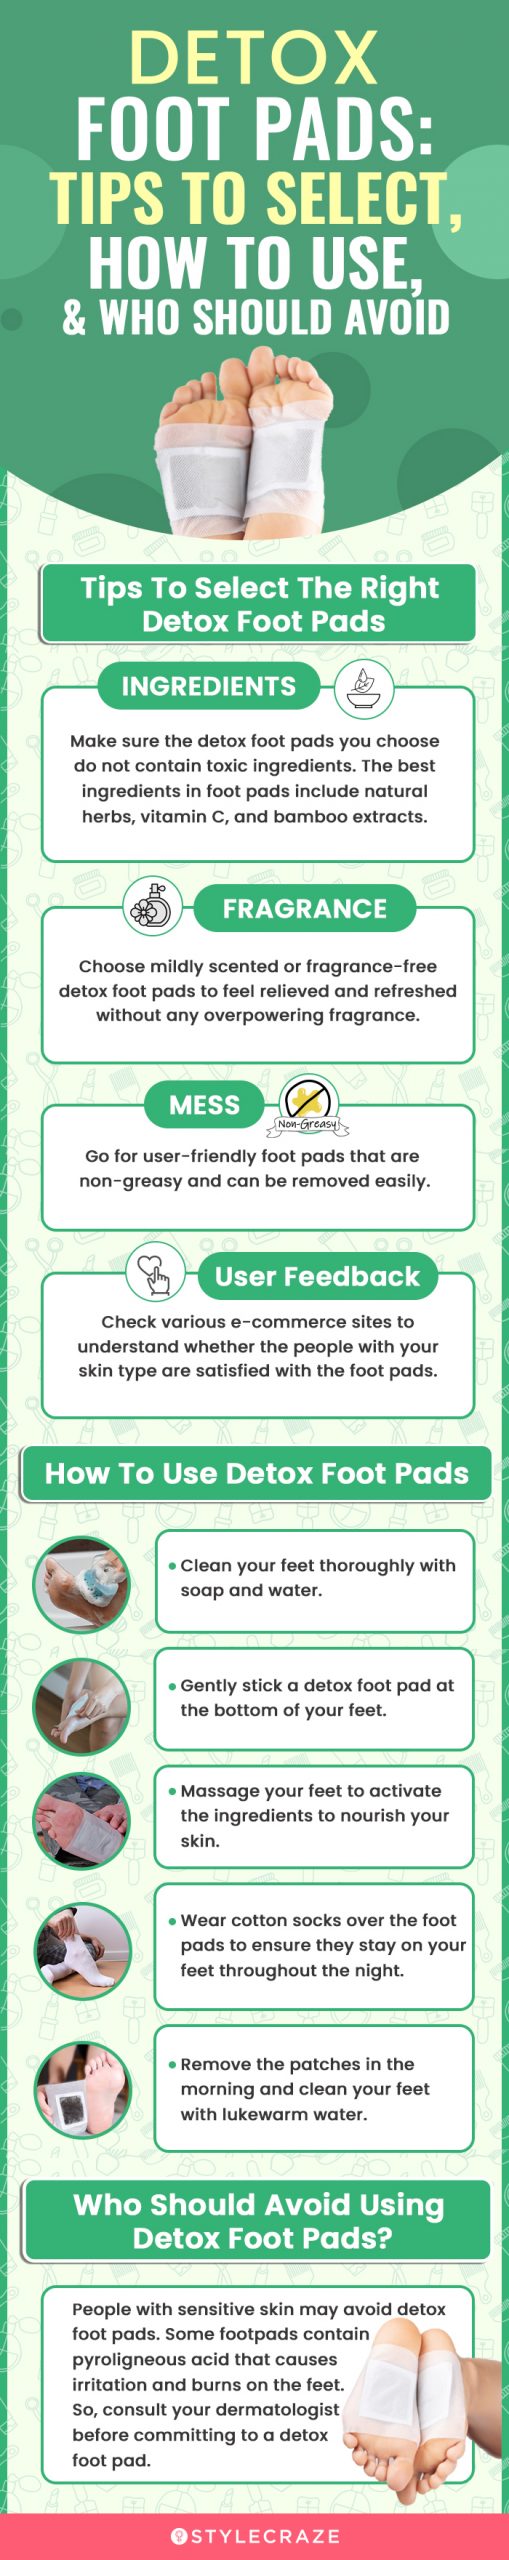 Detox Foot Pads: Tips To Select, How To Use & Who Should Avois (infographic)